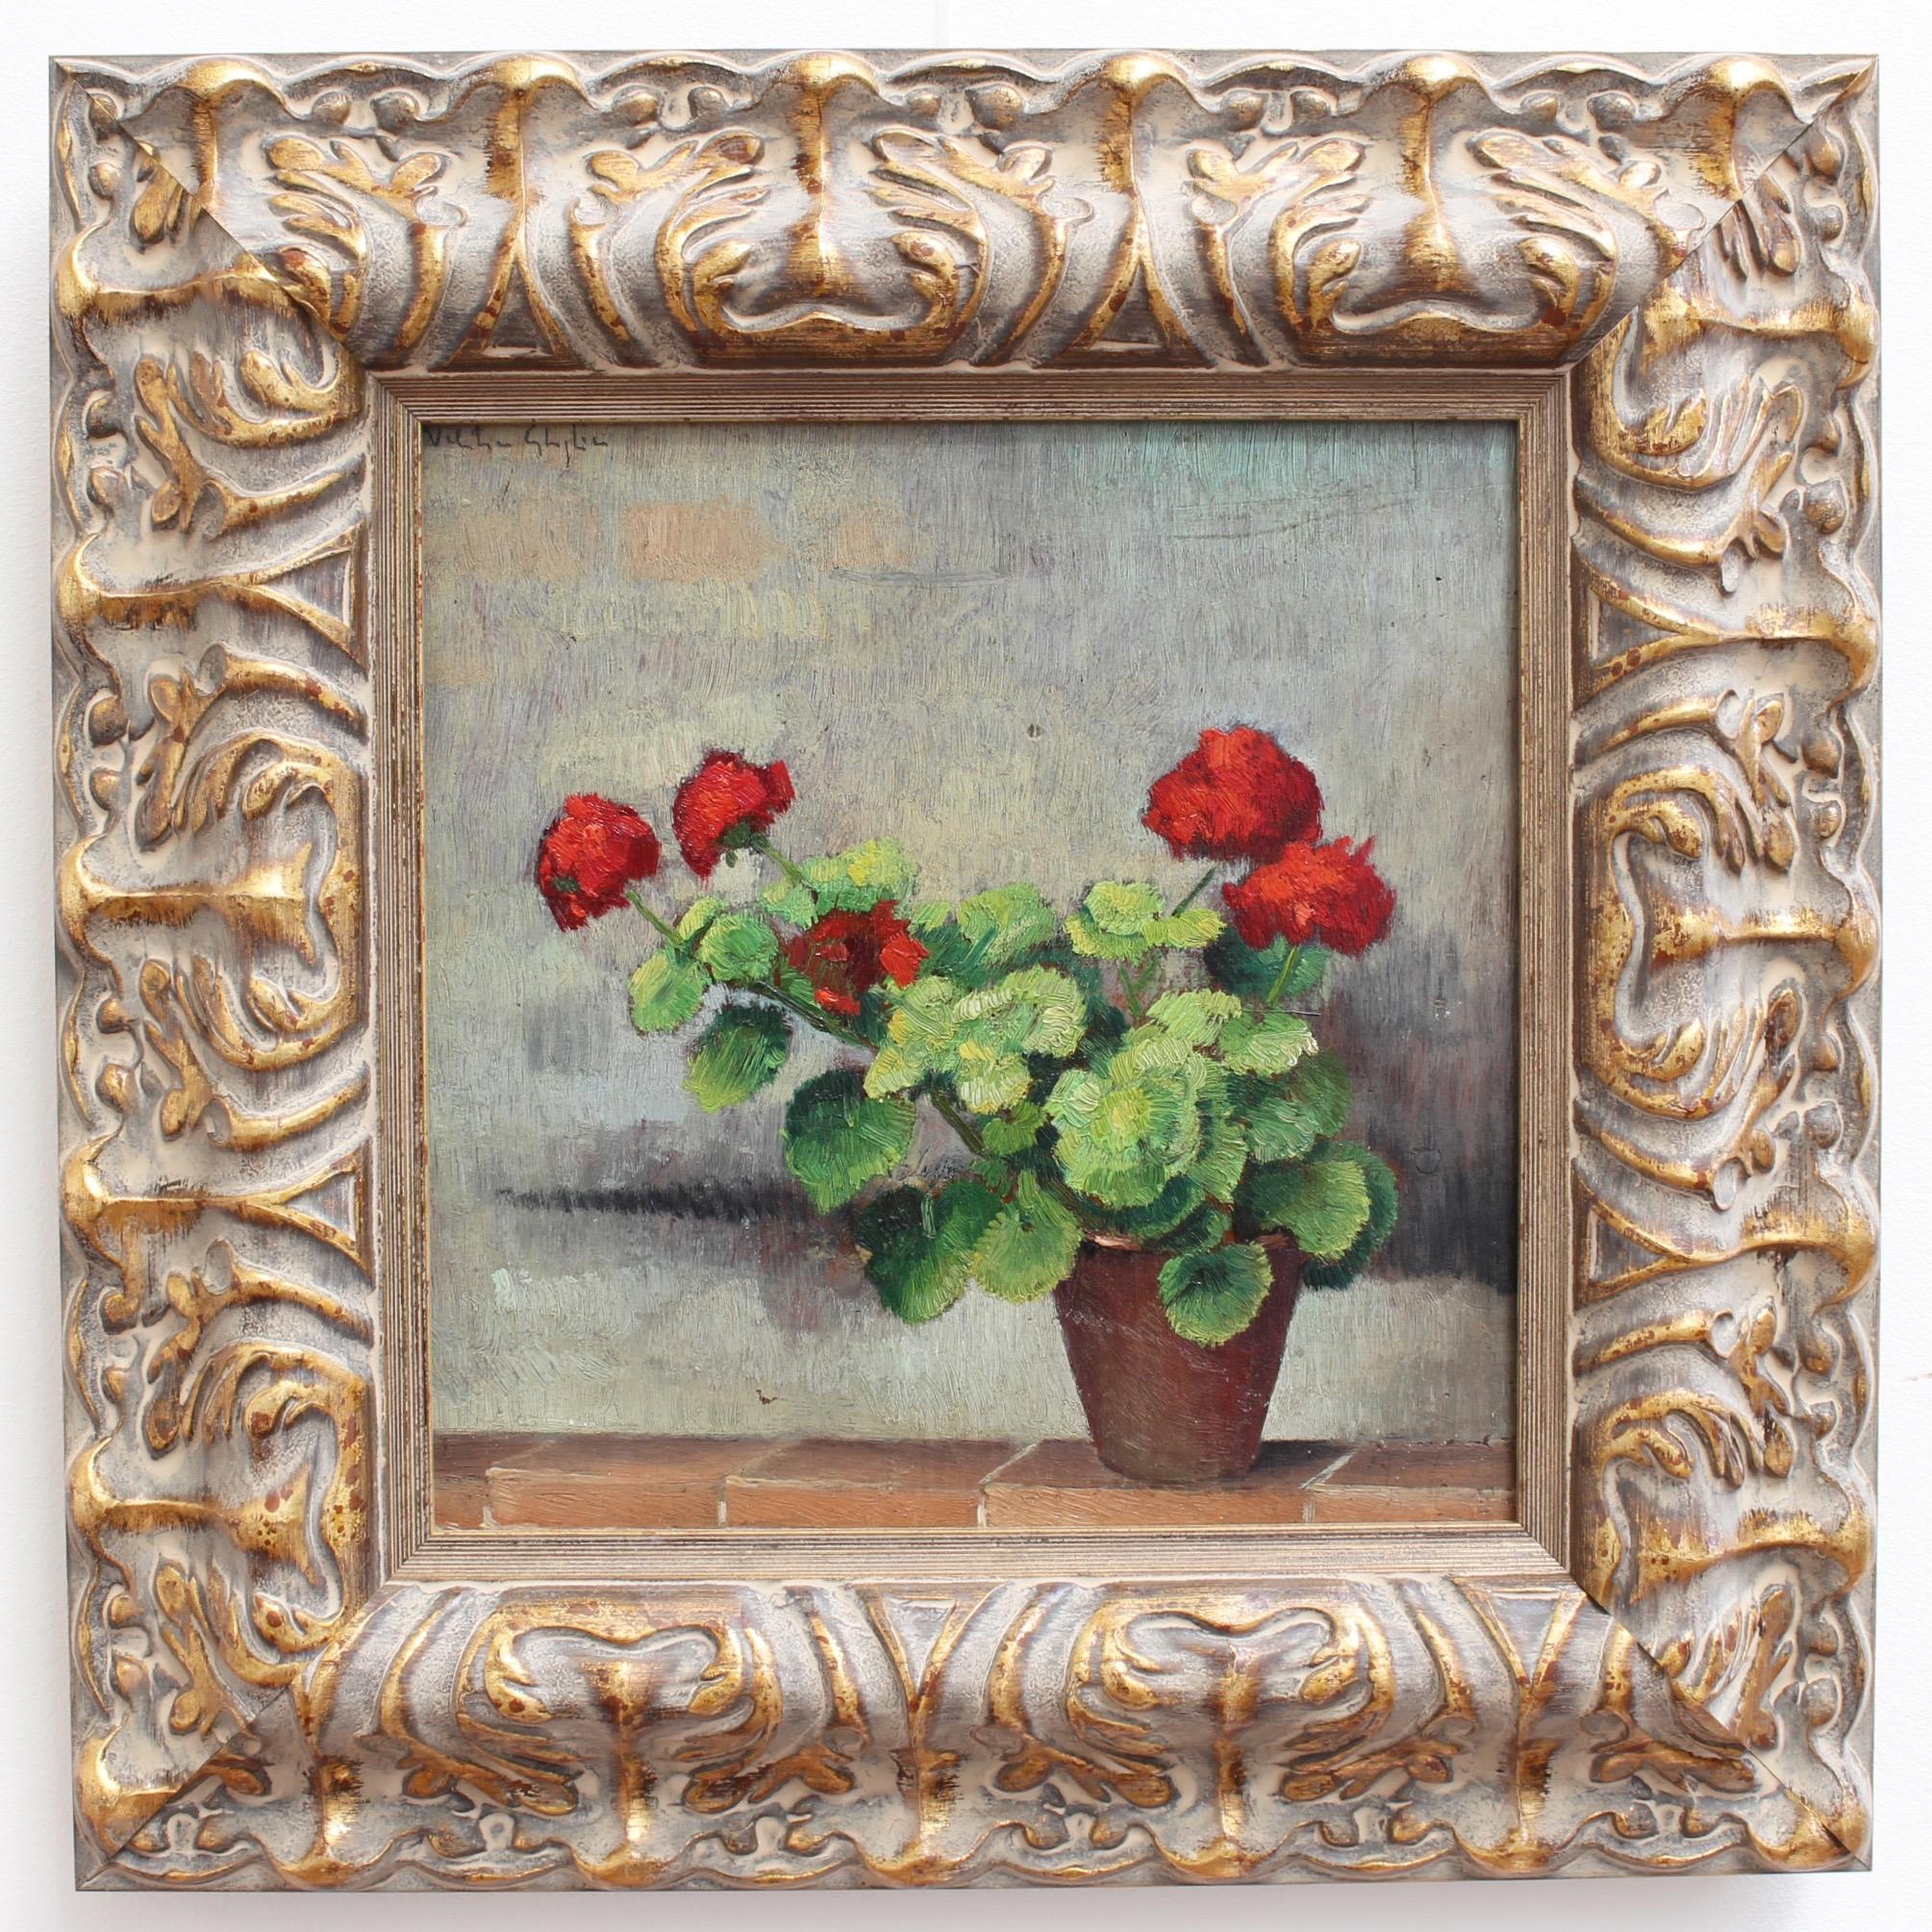 Valentino Ghiglia Figurative Painting - Still Life of Potted Plant with Red Flowers